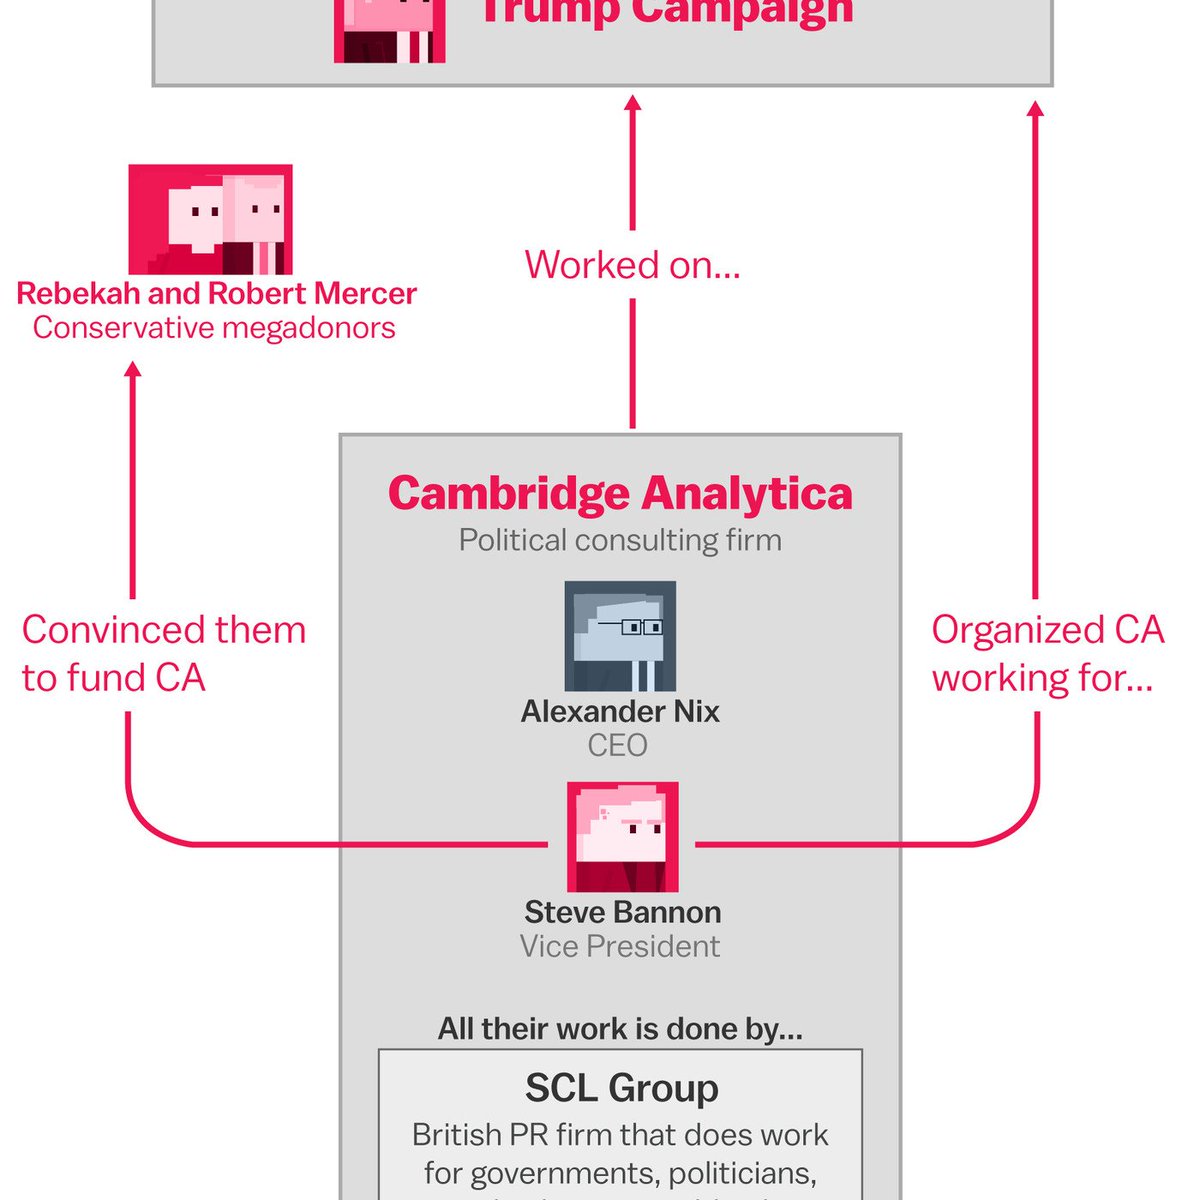 56) Utilizing stolen personal data of over 60 million Americans from Facebook through Cambridge Analytica and using psychographics to influence the 2016 election. (Steve Bannon was involved in this too)